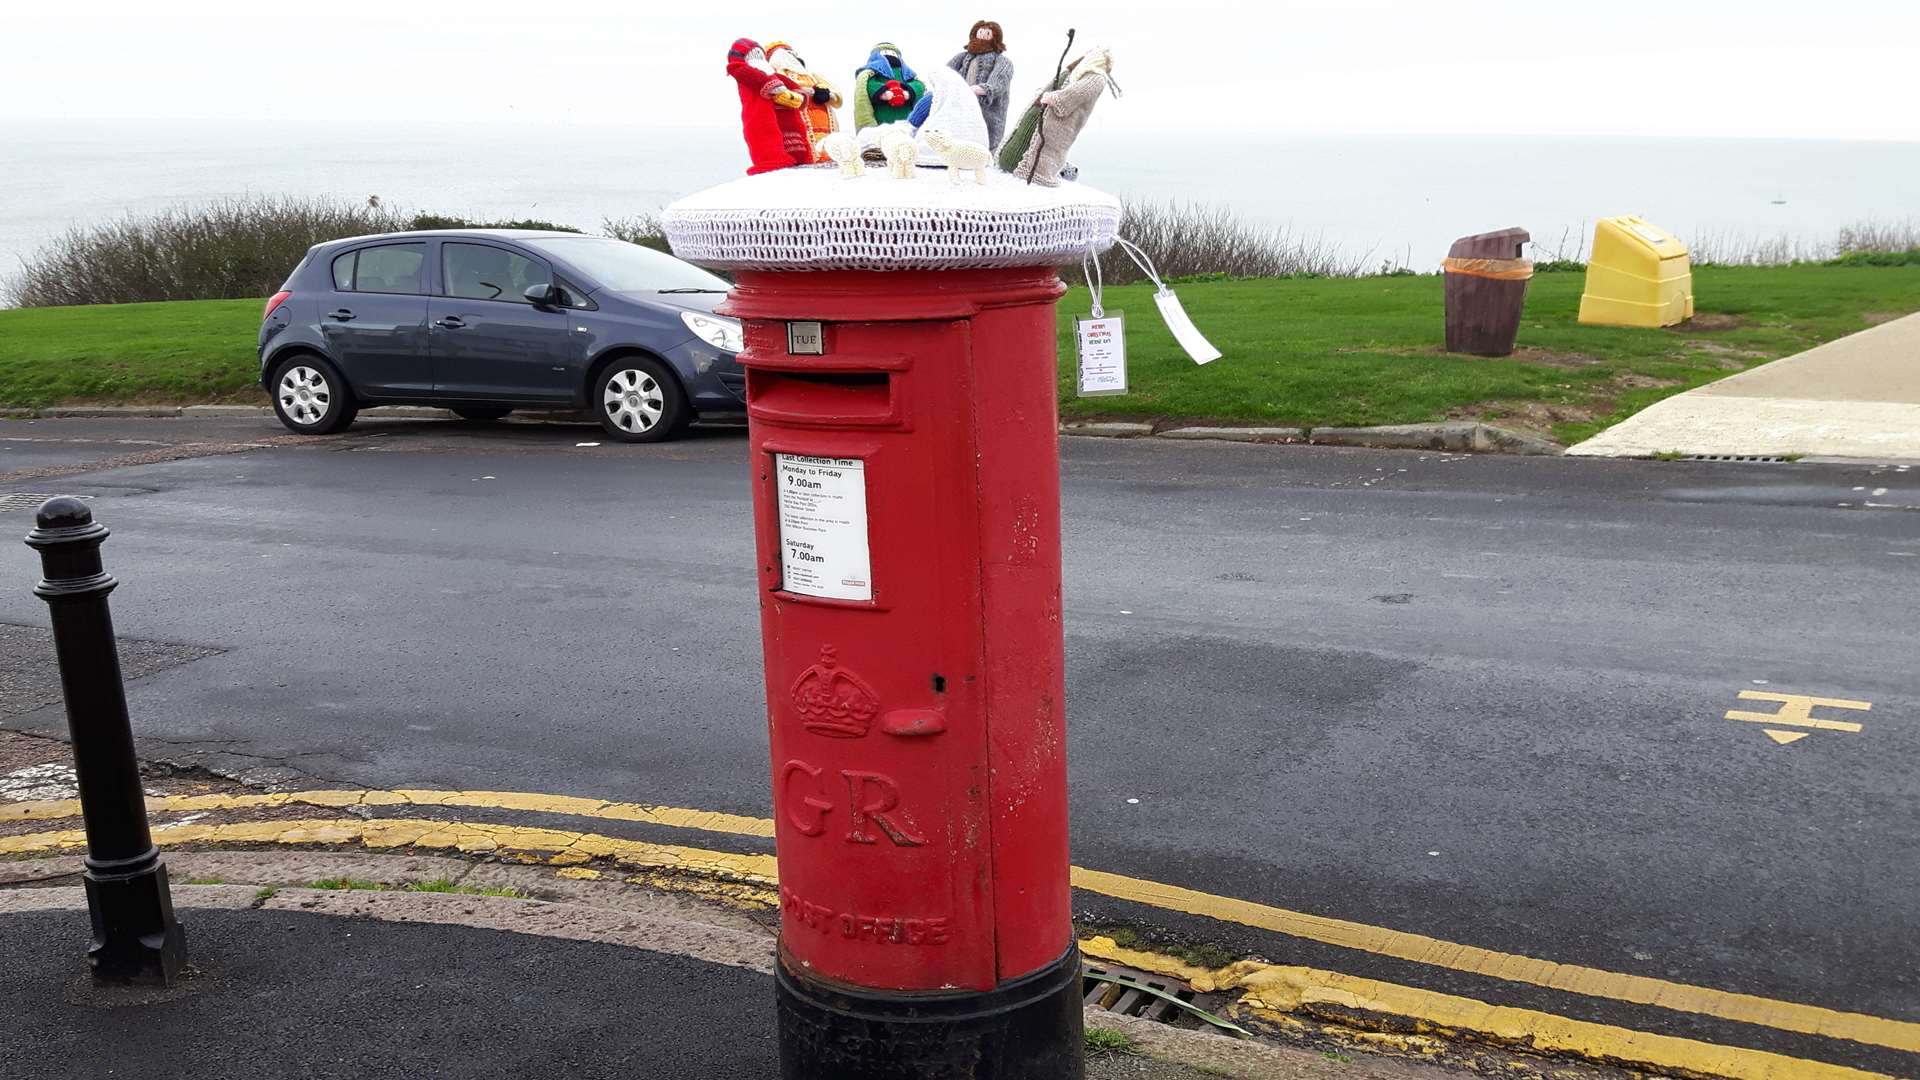 Pillar boxes in Beacon Hill have been covered in knitting